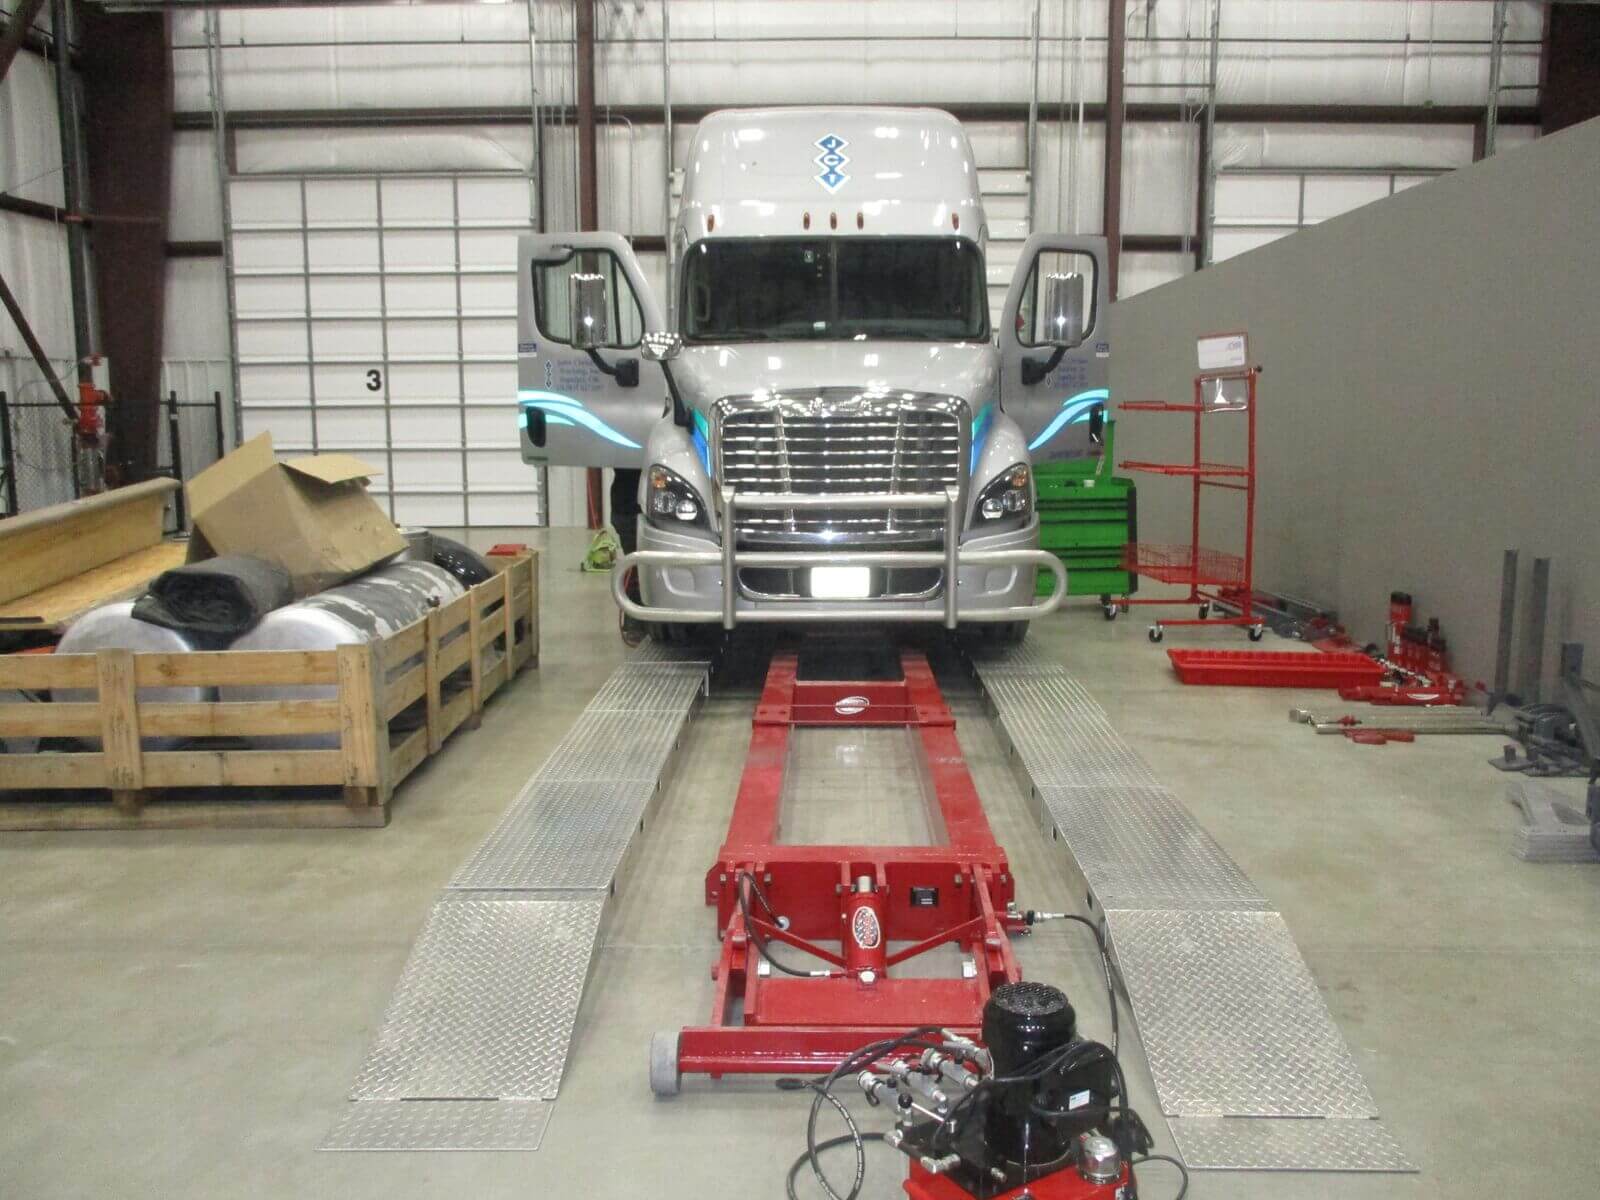 Picture of a truck in a service bay